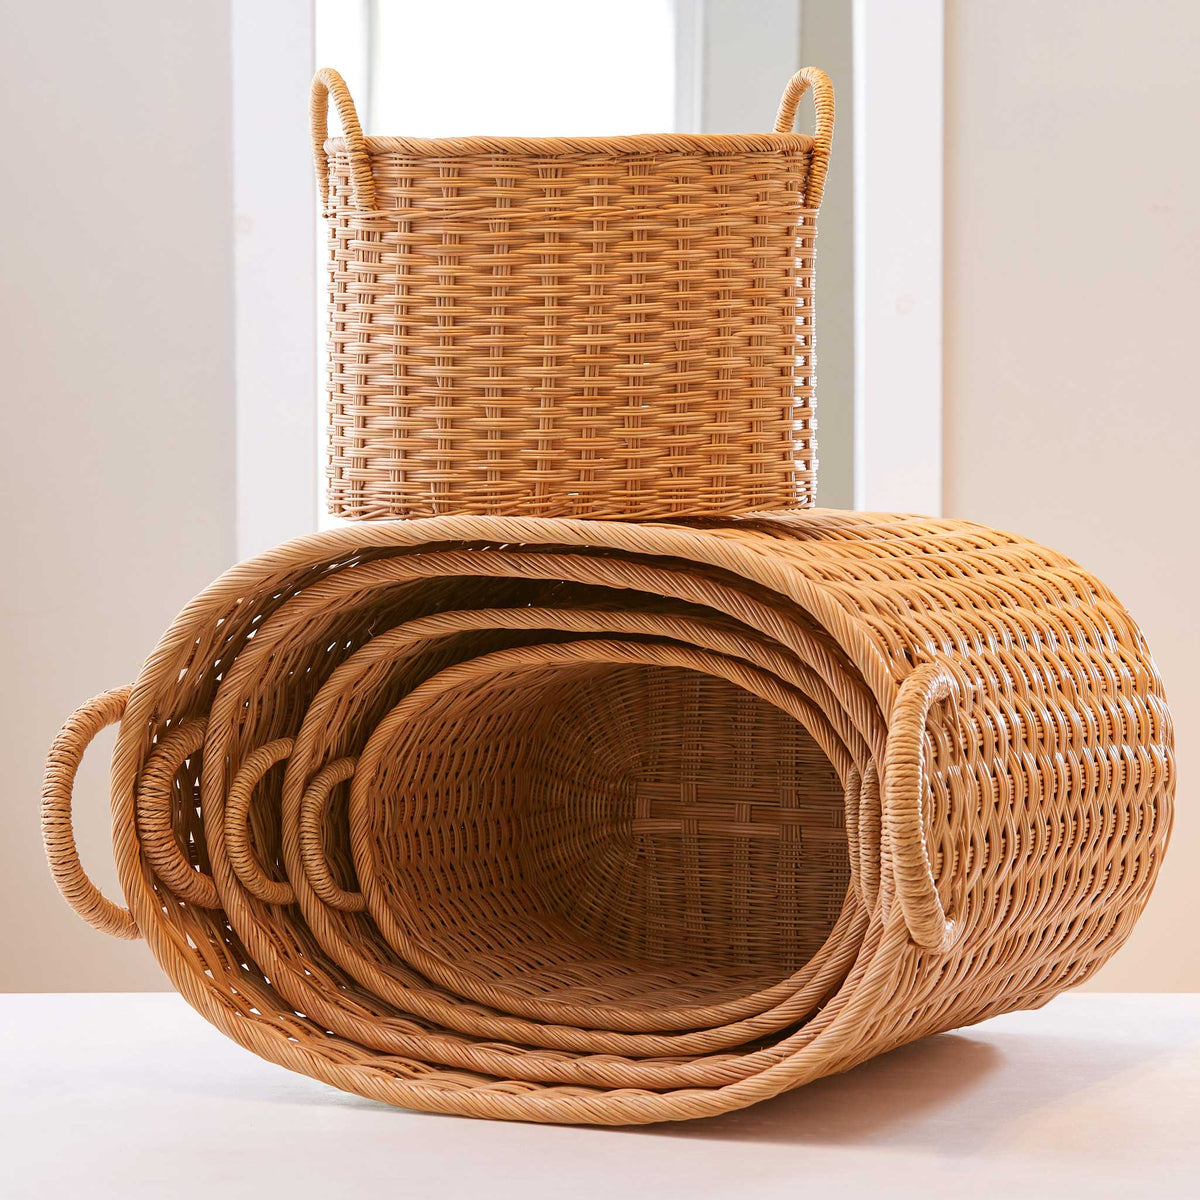 Oval rattan storage baskets with lids and handles. Perfect baskets for clothes, bathroom storage baskets, or baskets for shelves. XL, L, M, S, XS.